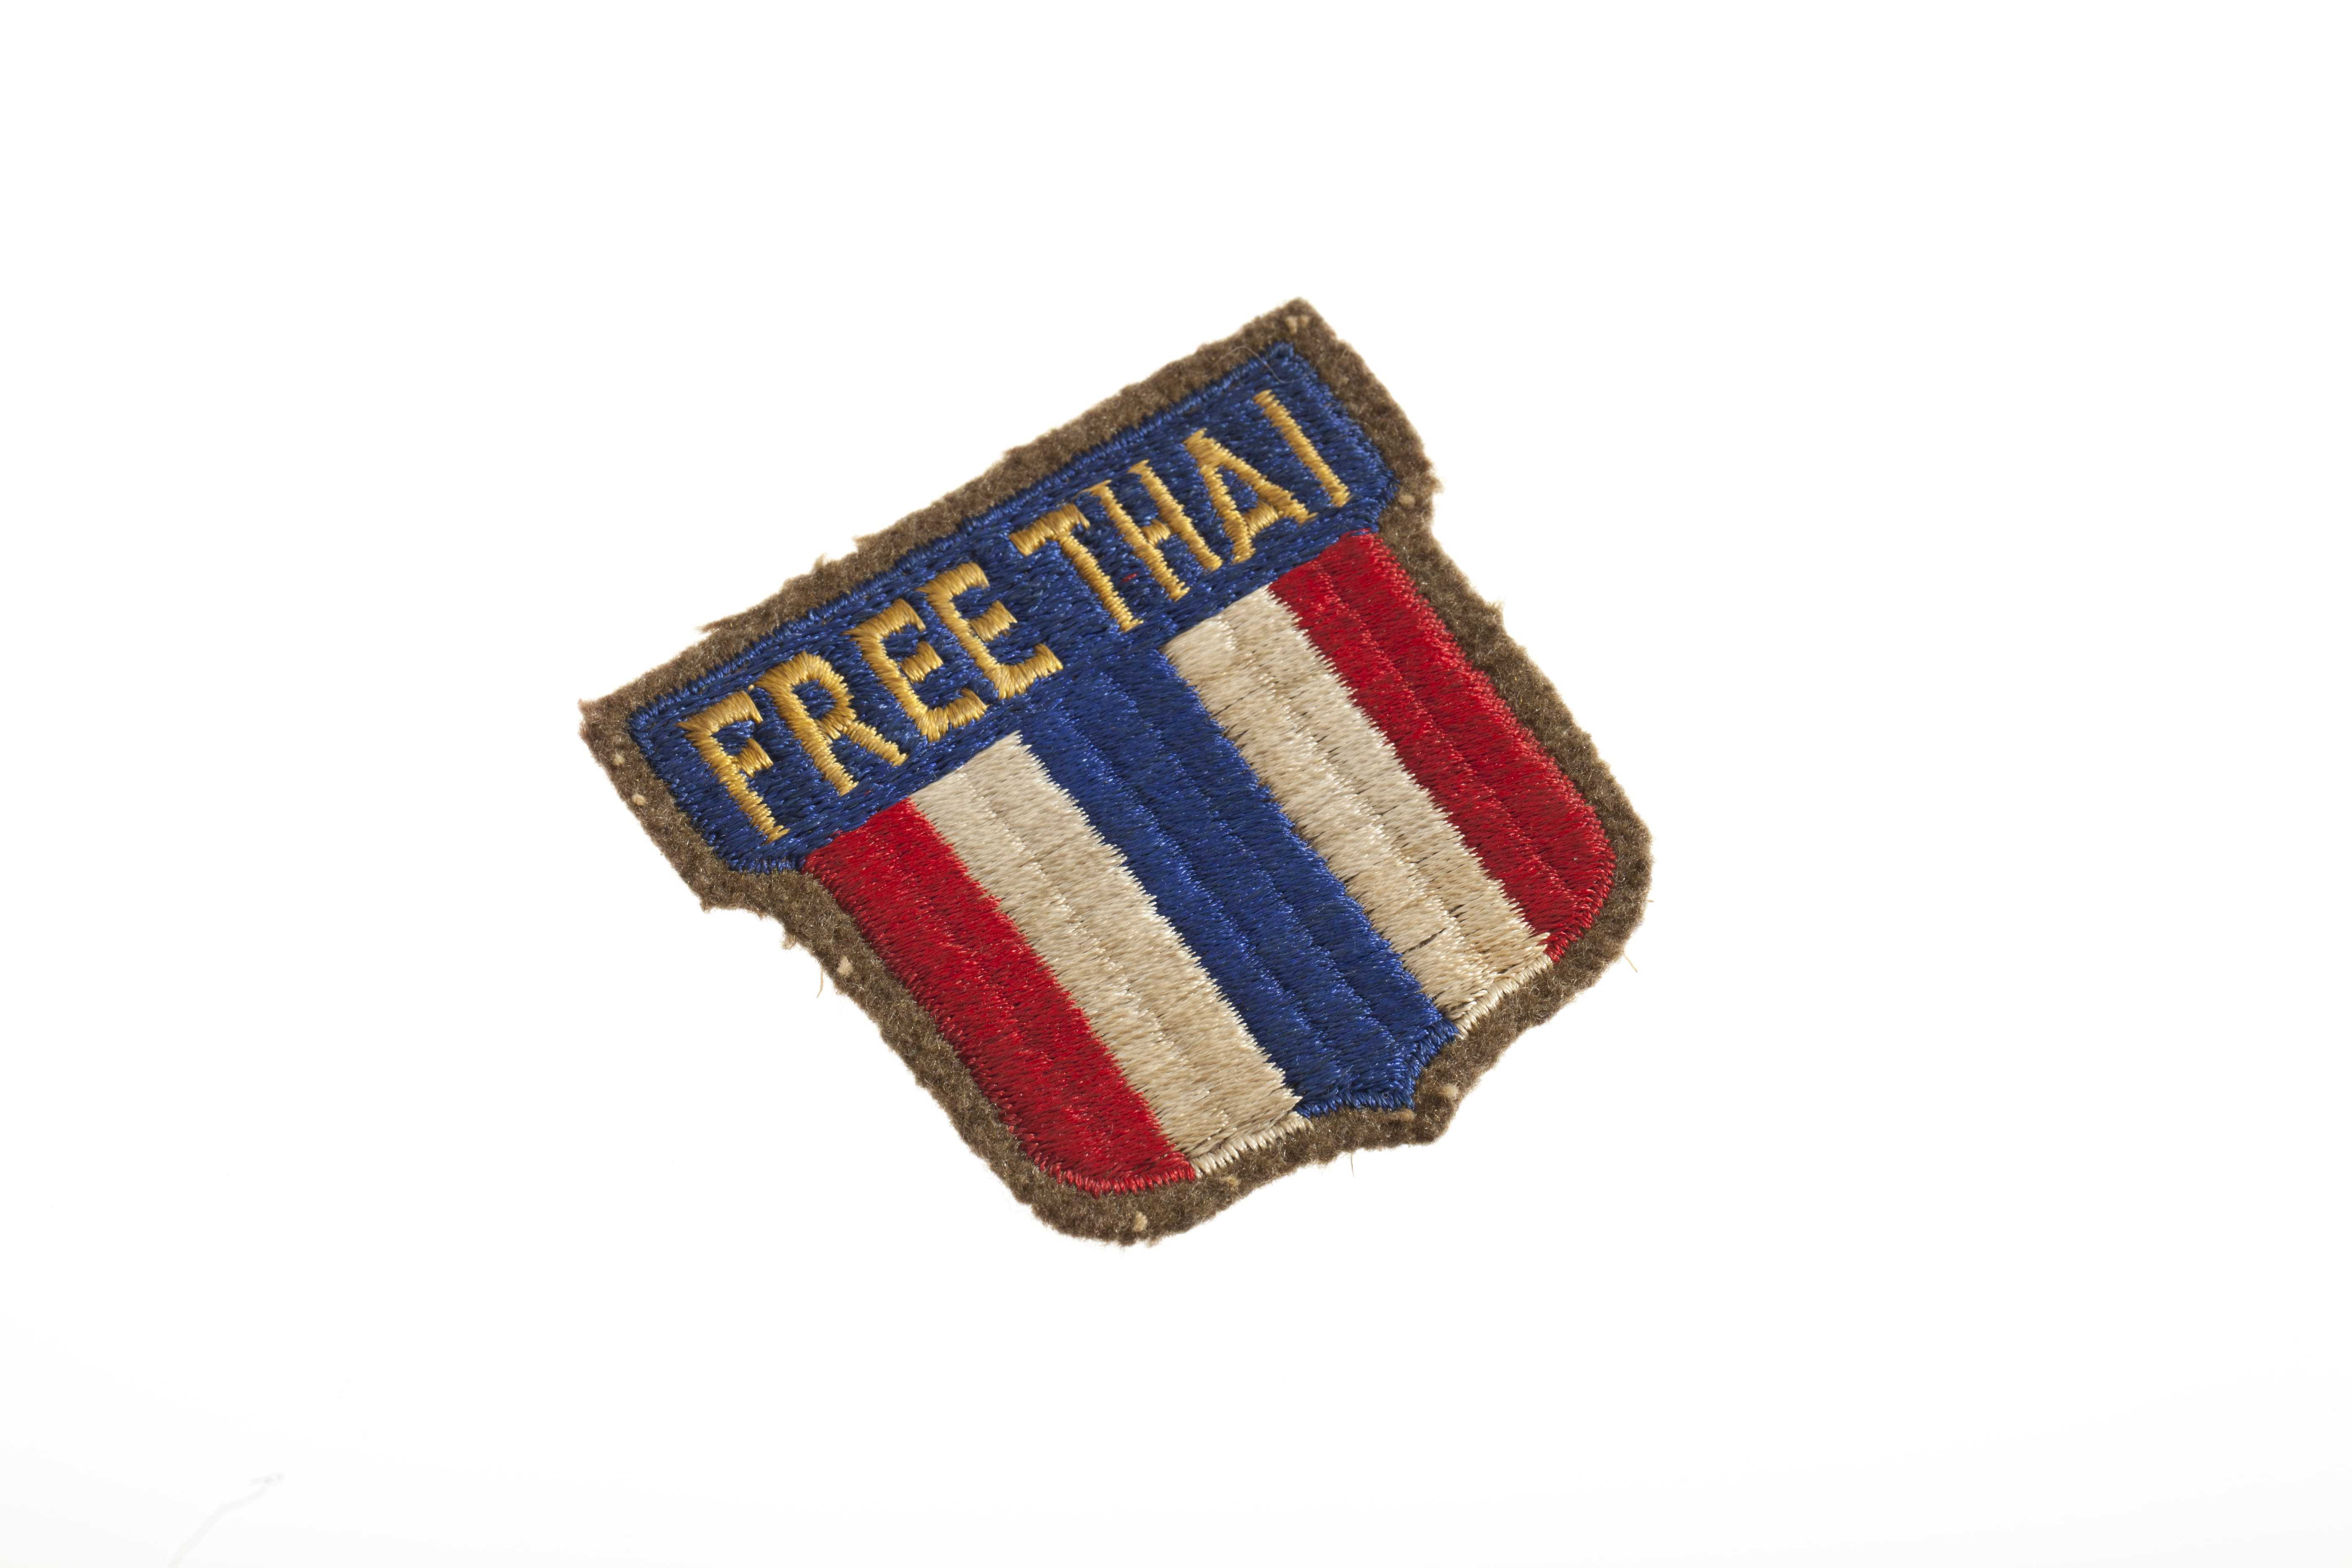 A small red, white, and blue patch with the words "Free Thai."